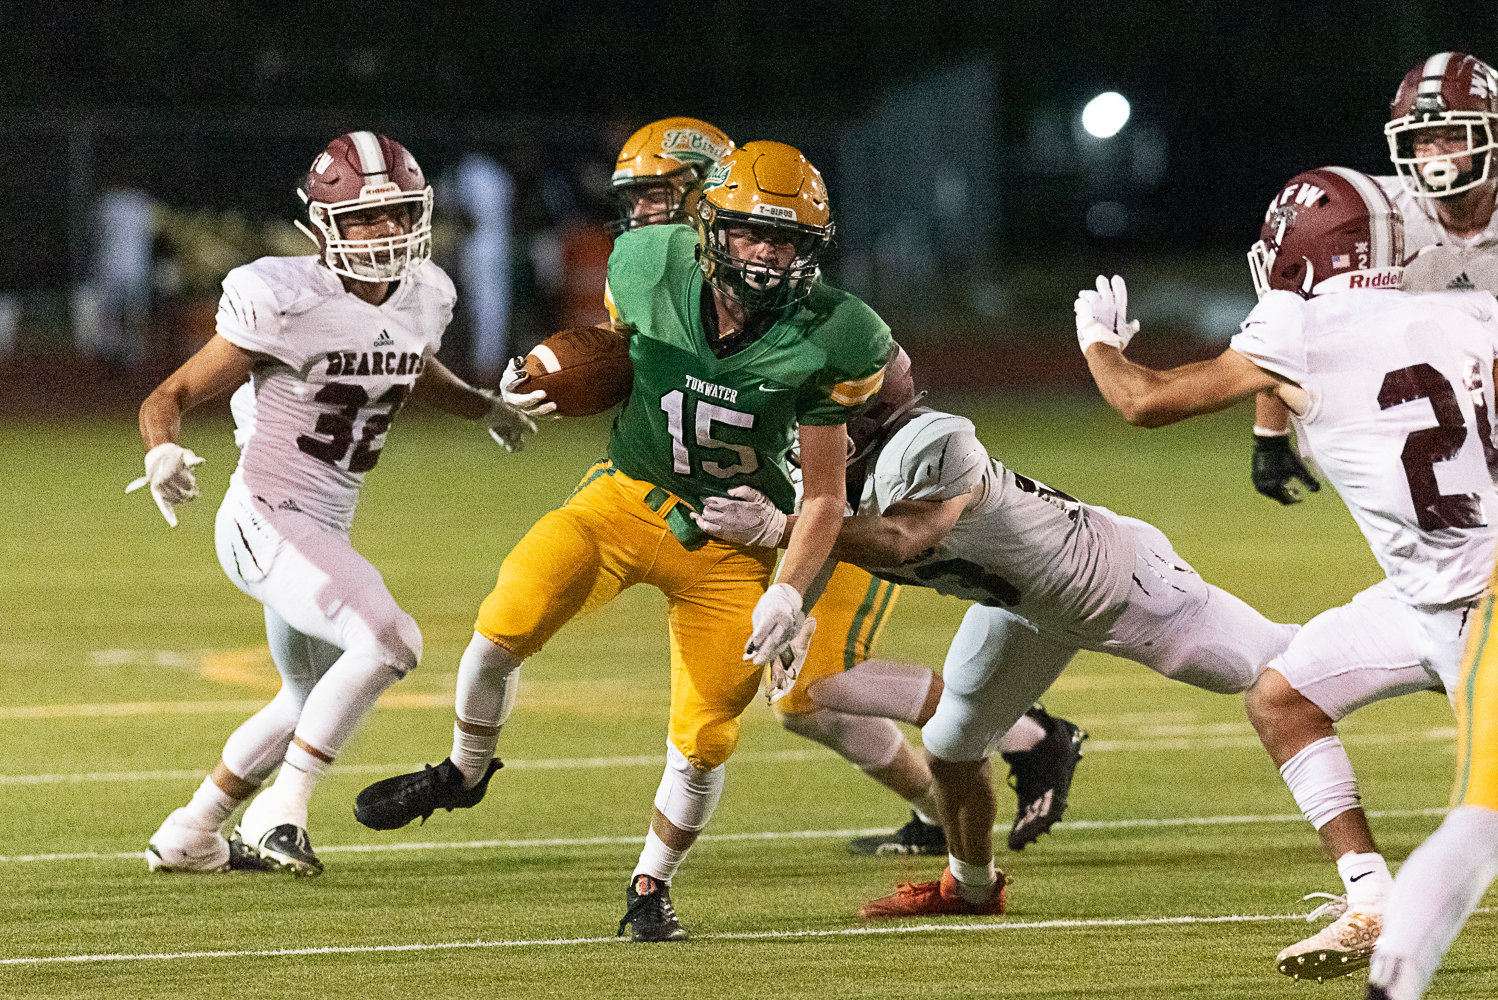 Logan Cole carries the ball during Tumwater's 28-7 loss to W.F. West on Sept. 30.